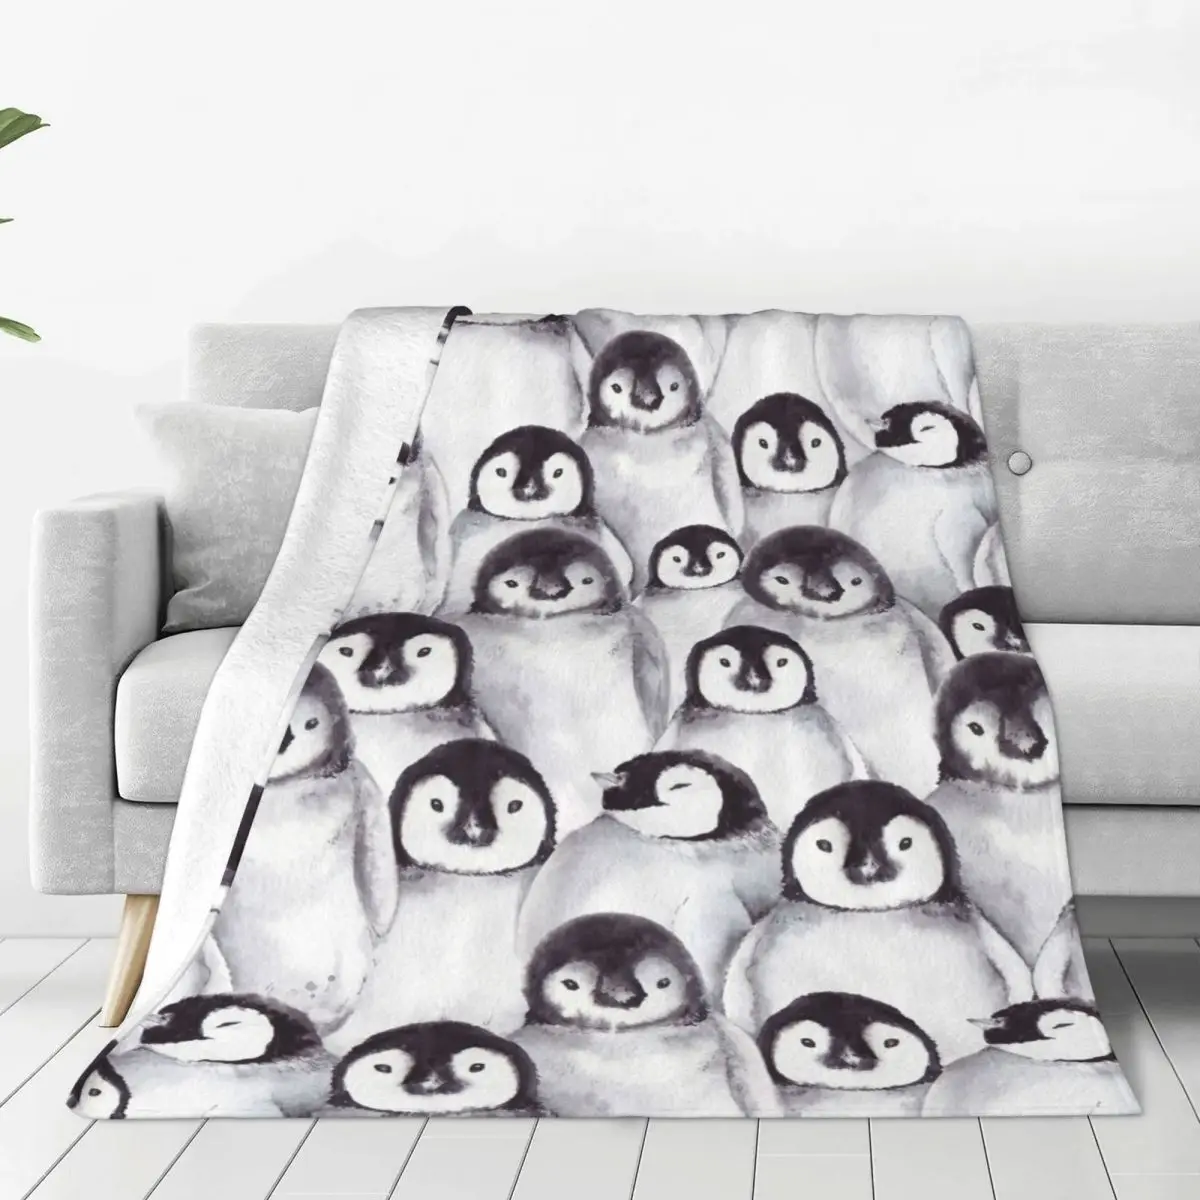 

Cute Baby Penguin Blankets Coral Fleece Plush Spring Autumn Animal Portable Soft Throw Blanket for Bedding Couch Bedding Throws